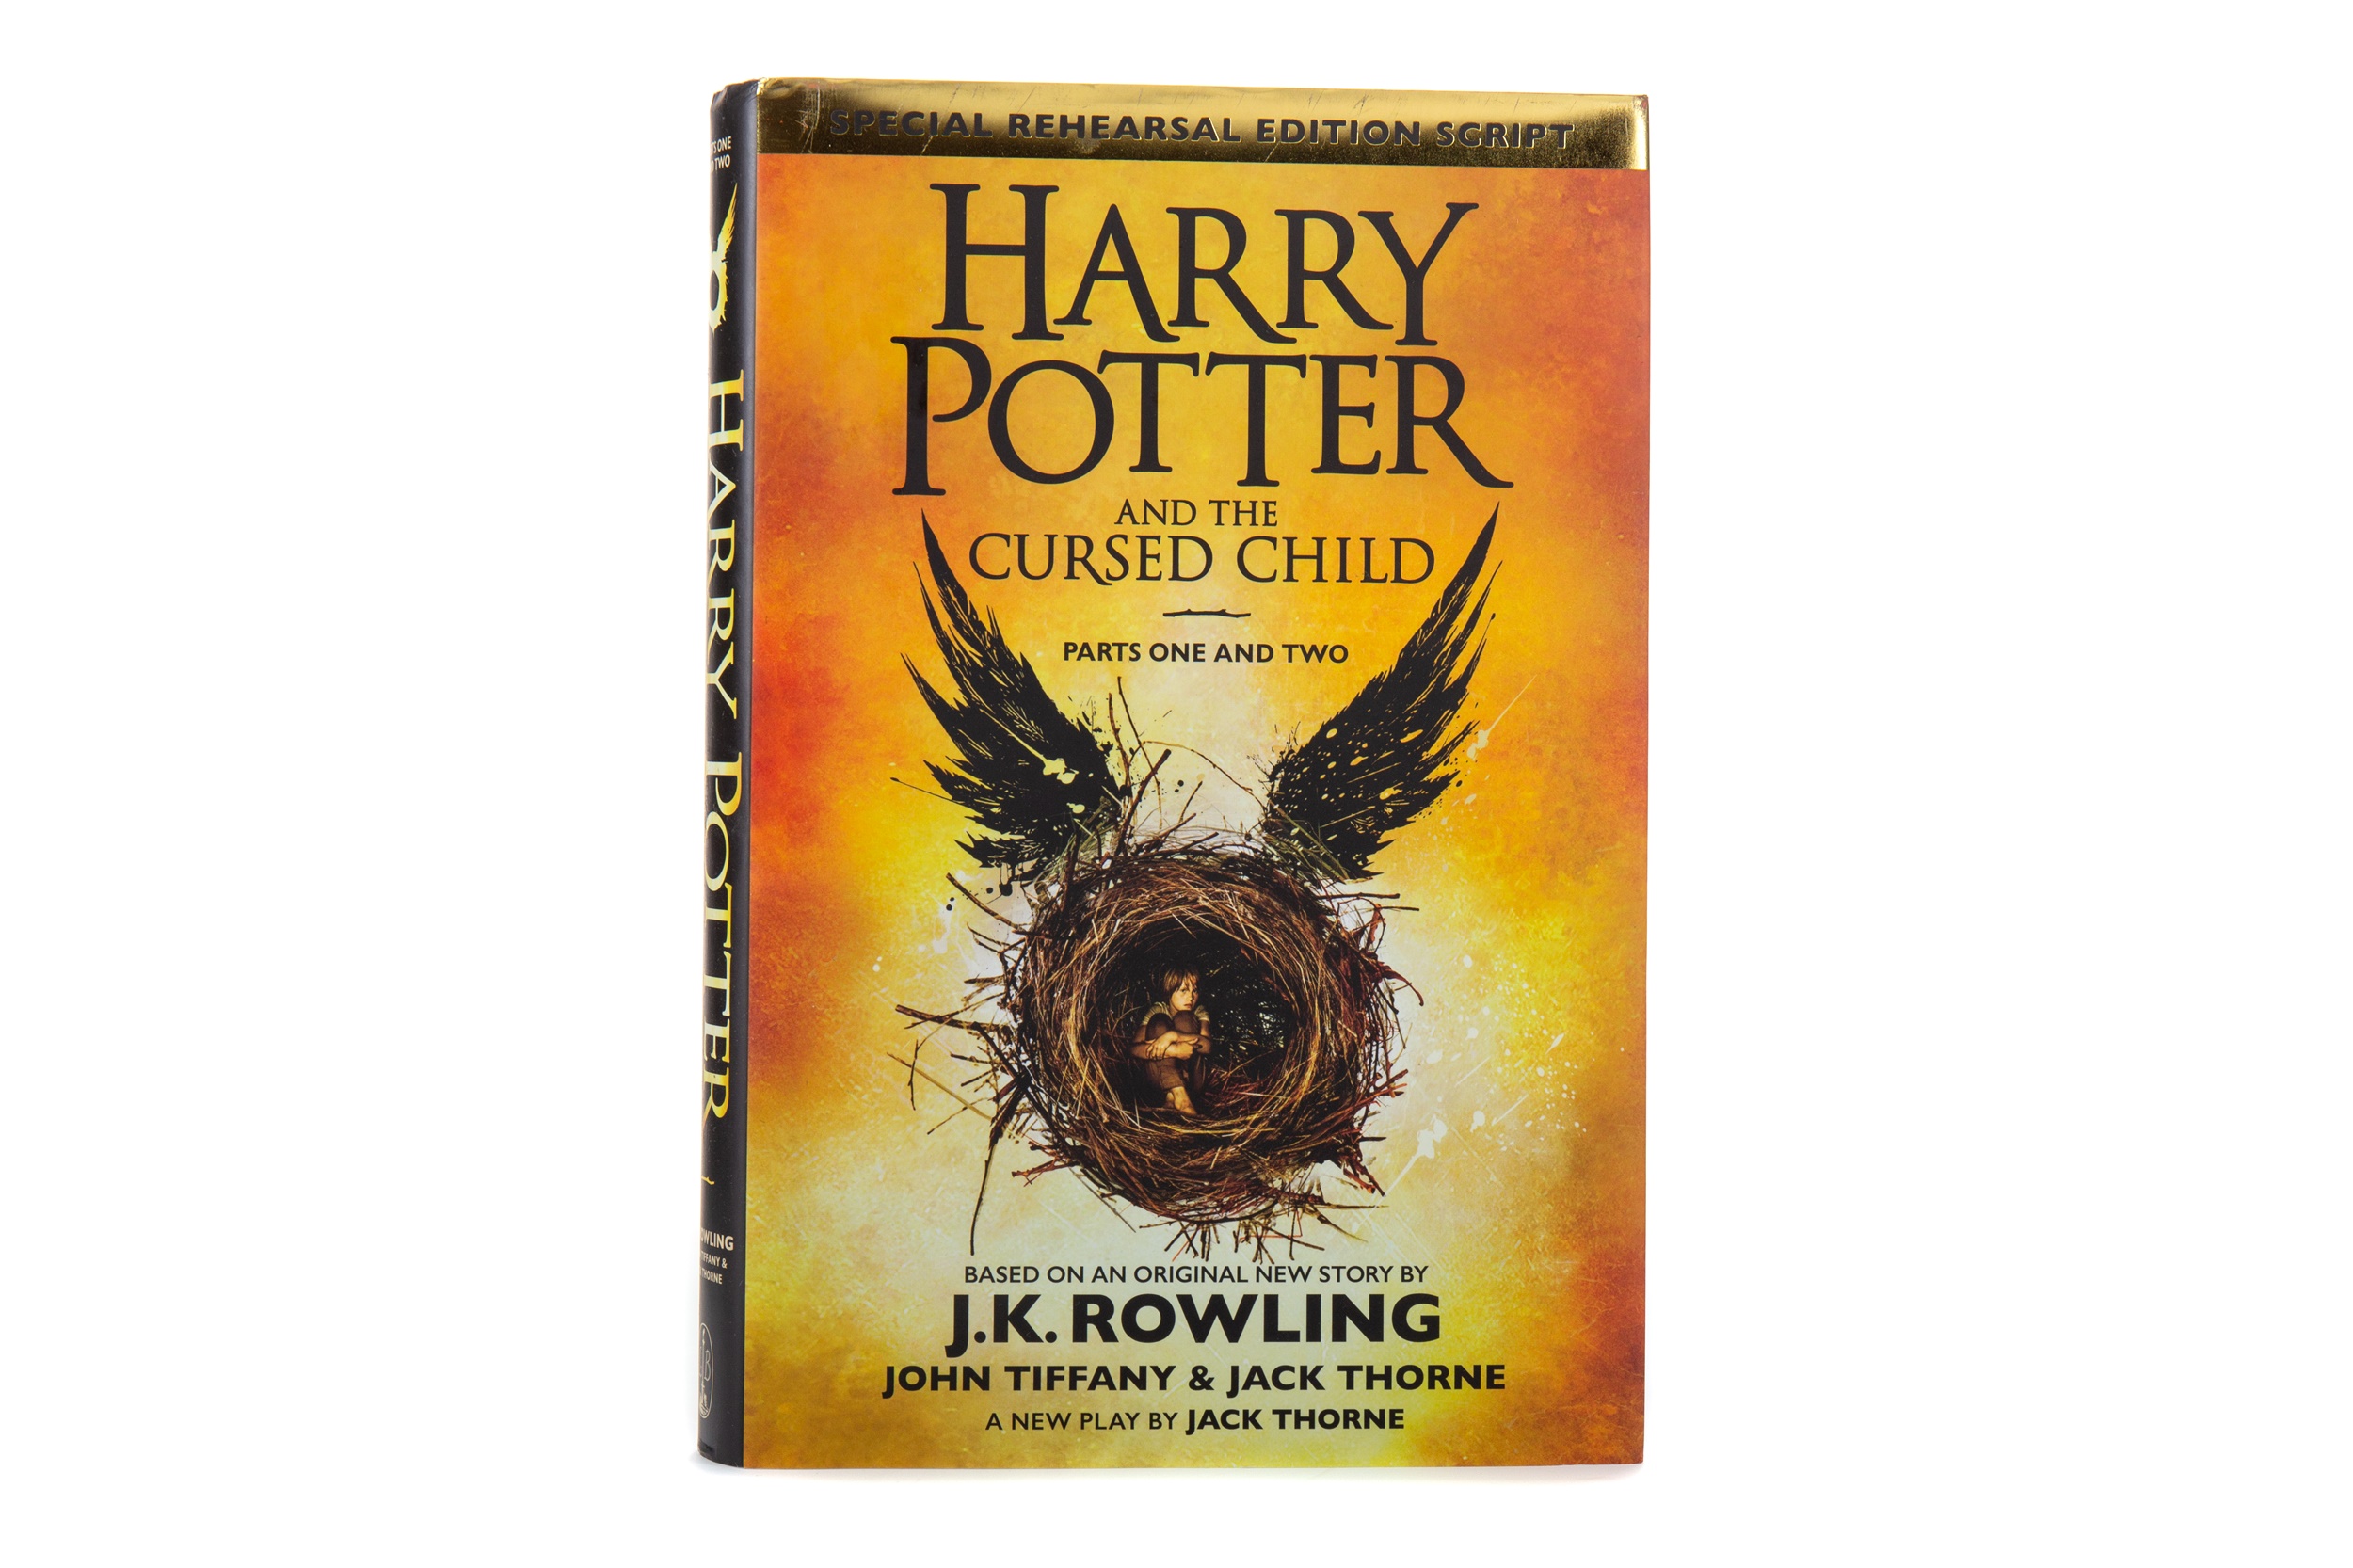 Signed-Harry-Potter-book-could-fetch-1000-3313sn42